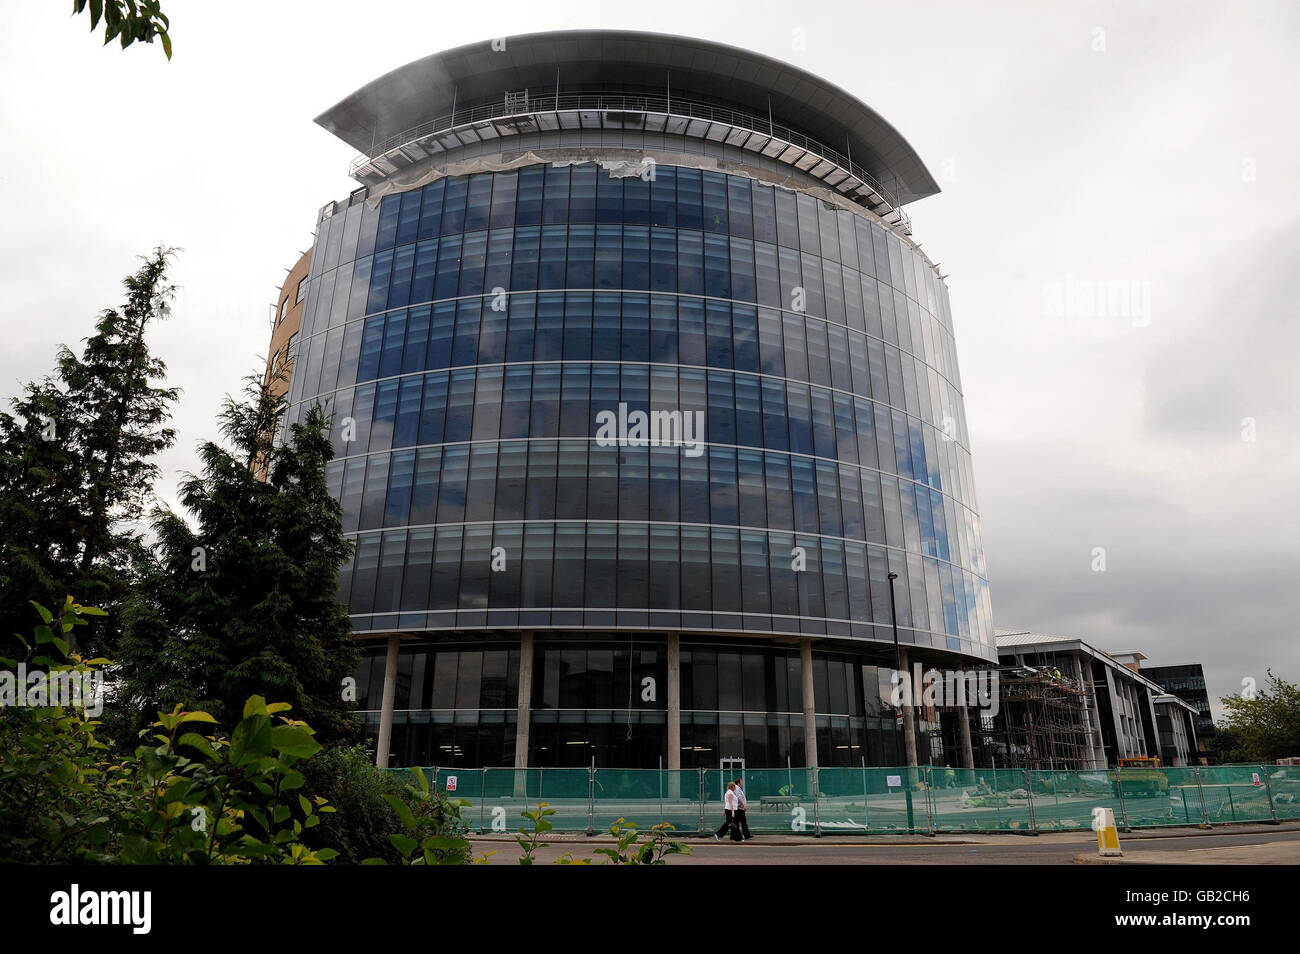 A general view of the new Multimillion pound Northern Rock offices in Gosforth, Newcastle, which is nearing completion. Northern Rock have announced today that they will make 800 compulsory job cuts. Stock Photo